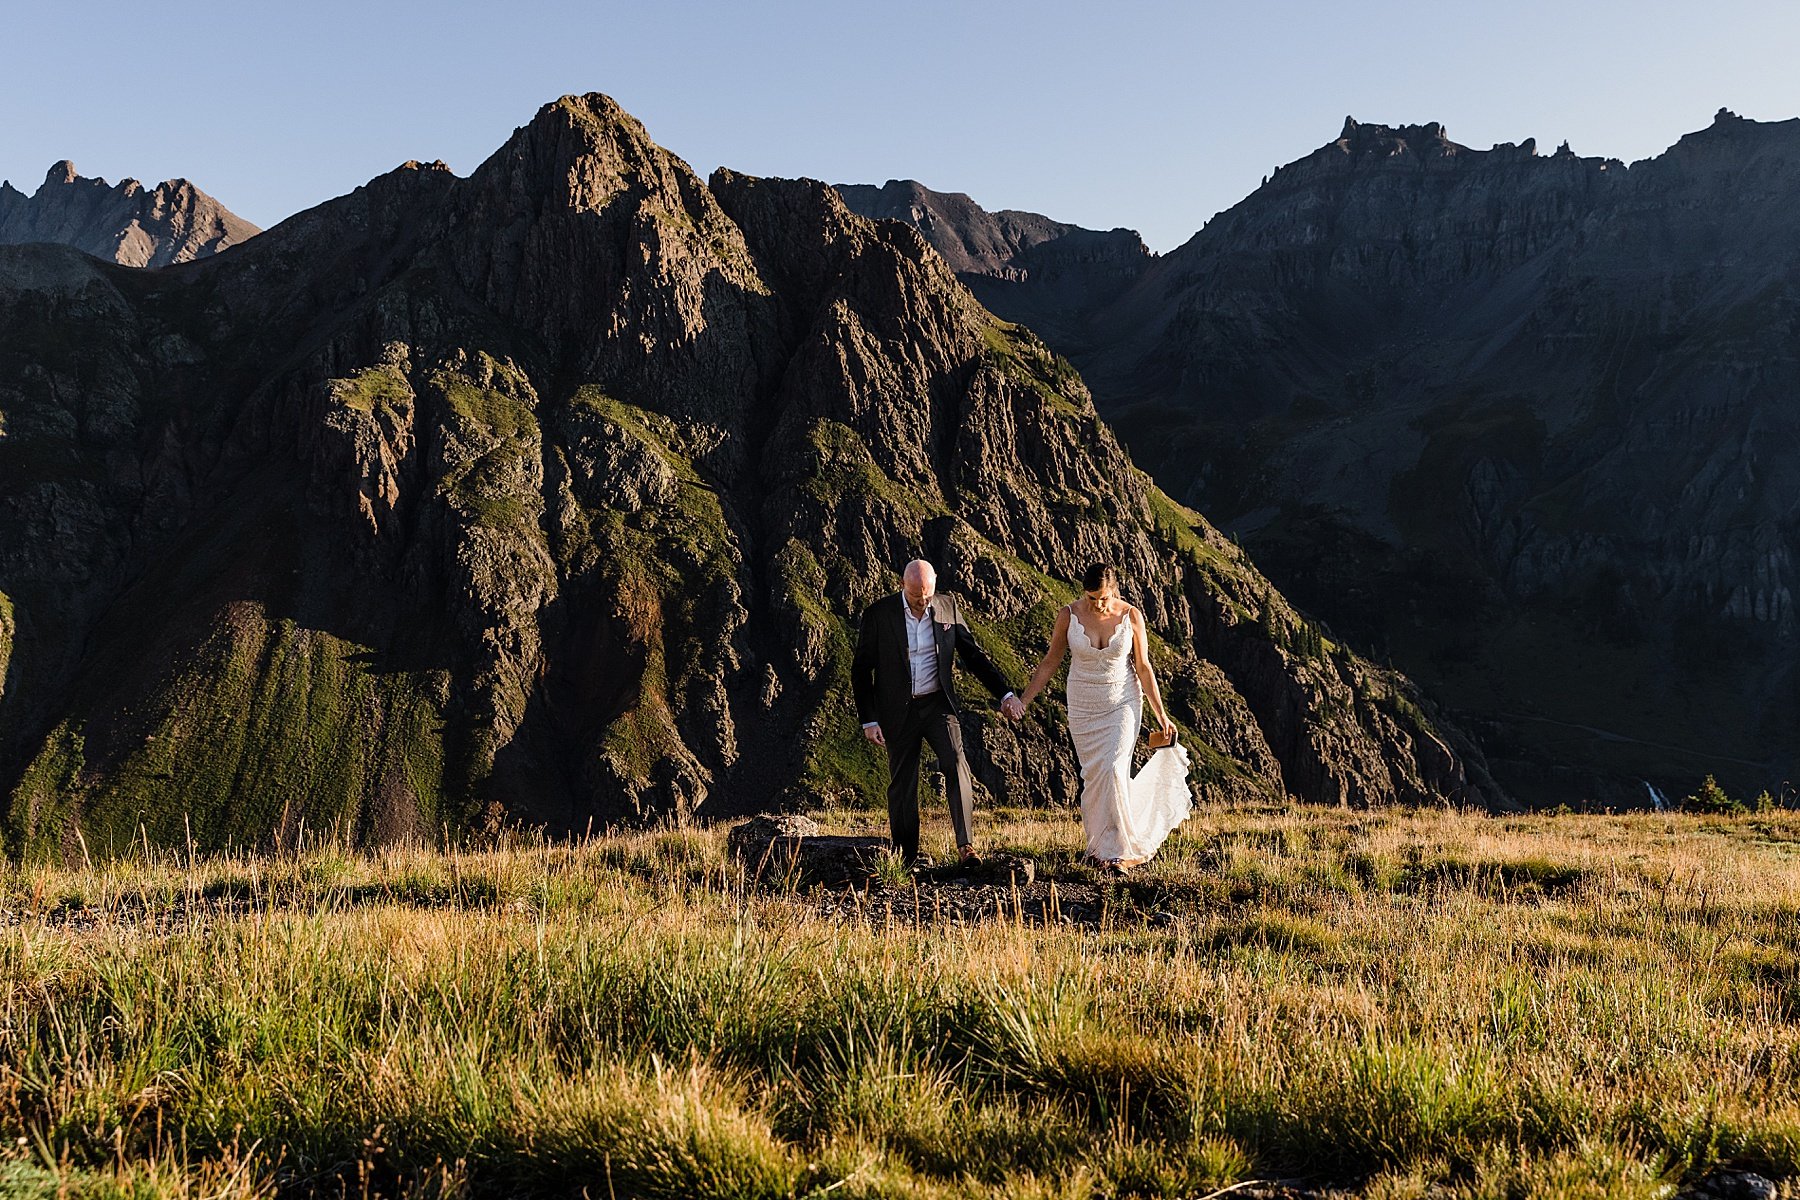 Ouray Jeep Elopement in Colorado